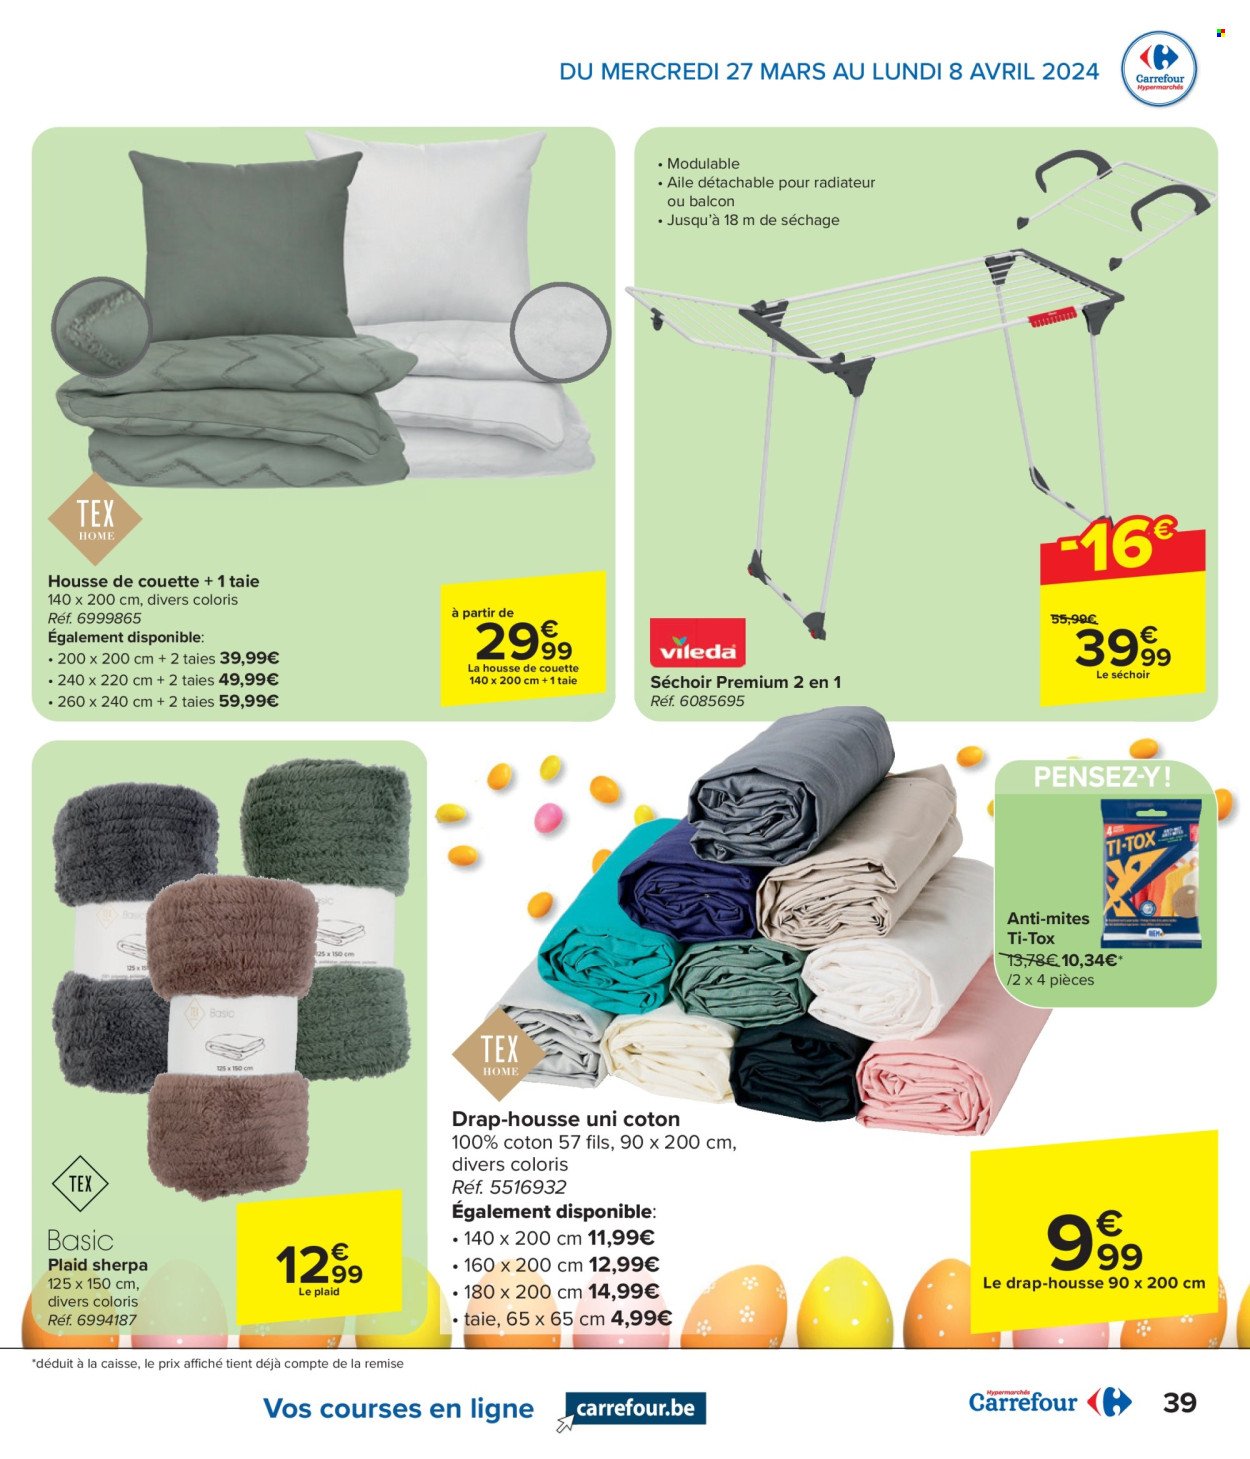 Catalogue Carrefour hypermarkt - 27.3.2024 - 8.4.2024. Page 39.